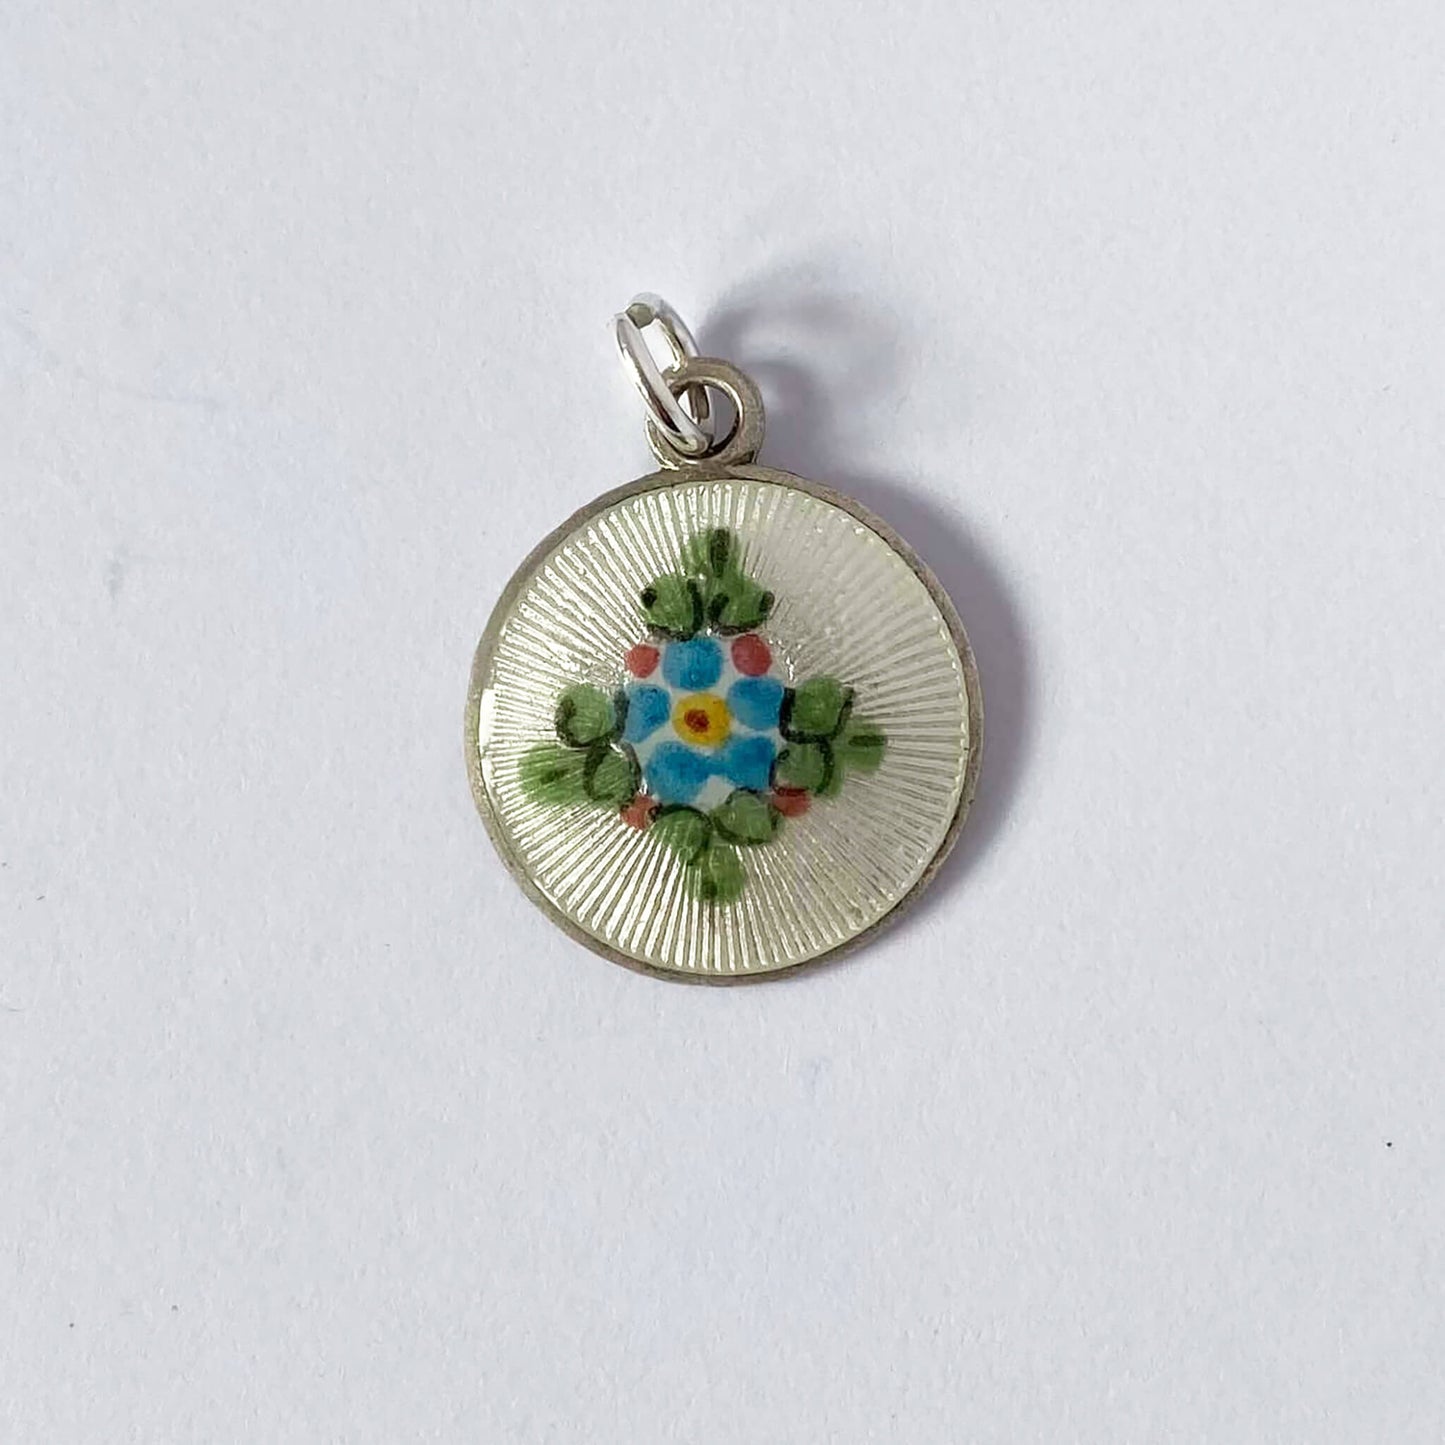 Vintage sixtieth anniversary or birthday forget me not floral charm sterling silver pendant from Charmarama